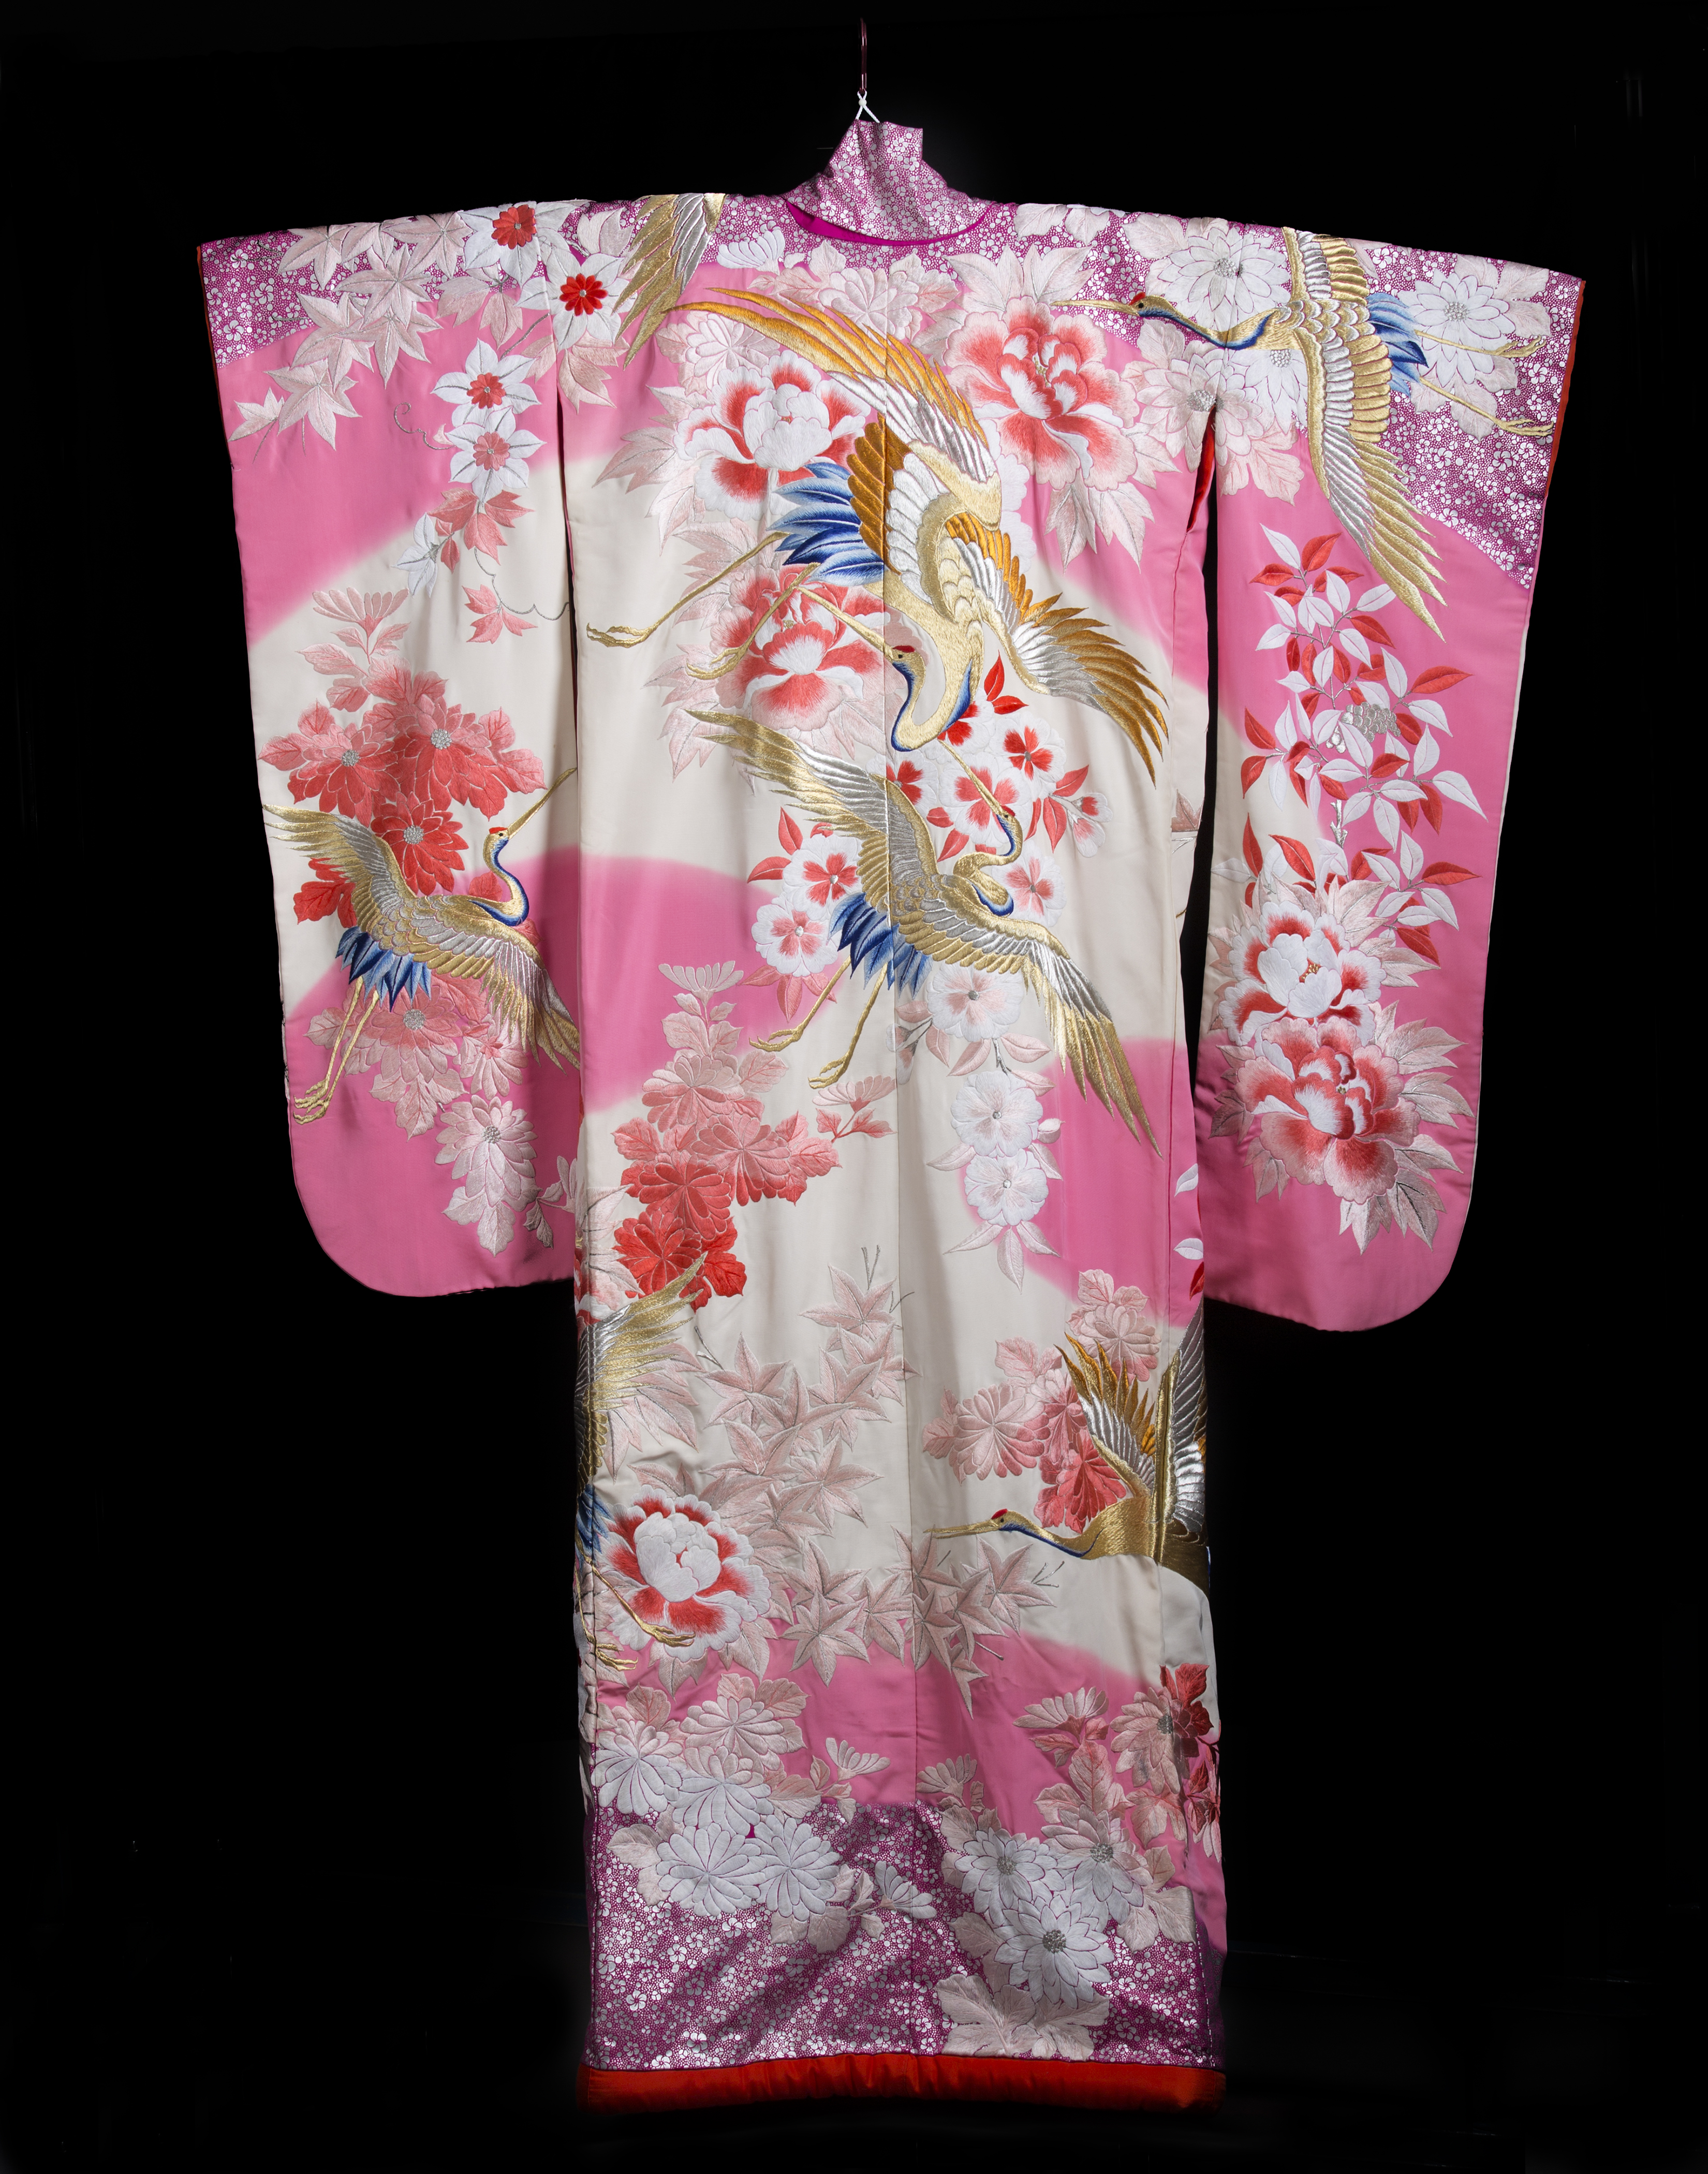 The exhibition “Reimagining the Kimono,” presented by the Texas Fashion Collecti